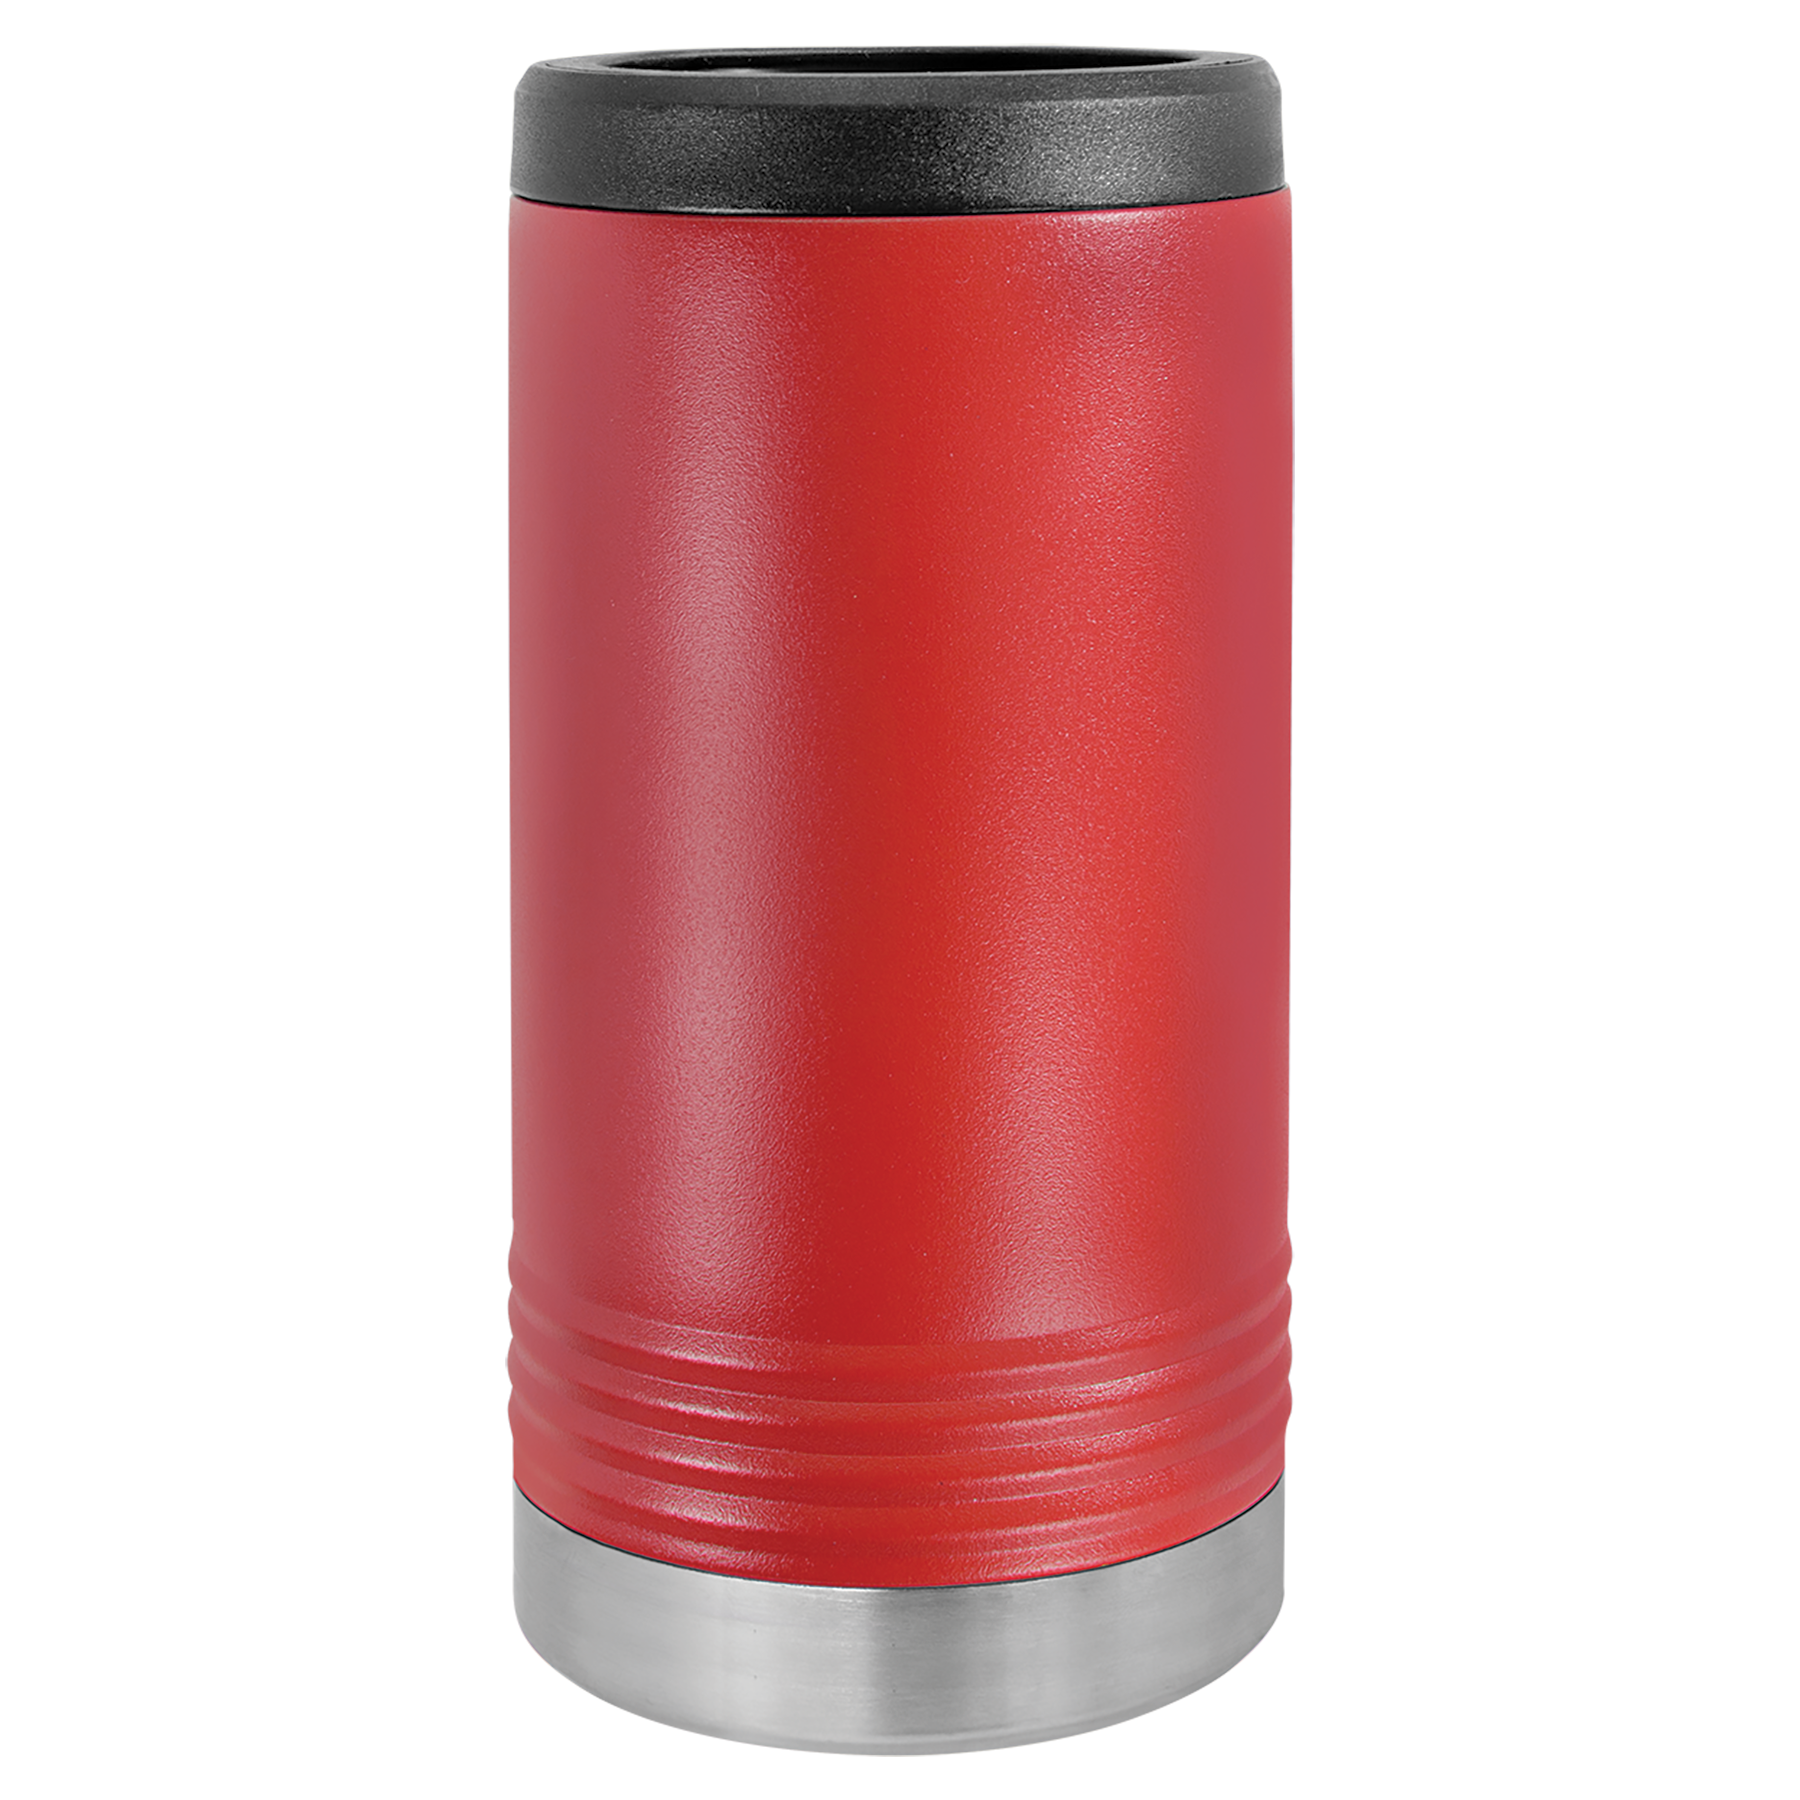 Red Slim Beverage Holder -One Free Engraving   -Double-wall Vacuum Insulated  -Made from 18/8 Gauge Stainless Steel (Type 304 Food Grade)  -Fits most Tall Slim Cans  -Not recommended for Dishwasher  -Works with Cold and Hot Drinks  -17 Color Options  -Perfect for Personalized Gifts, Awards, Incentives, Swag & Fundraisers